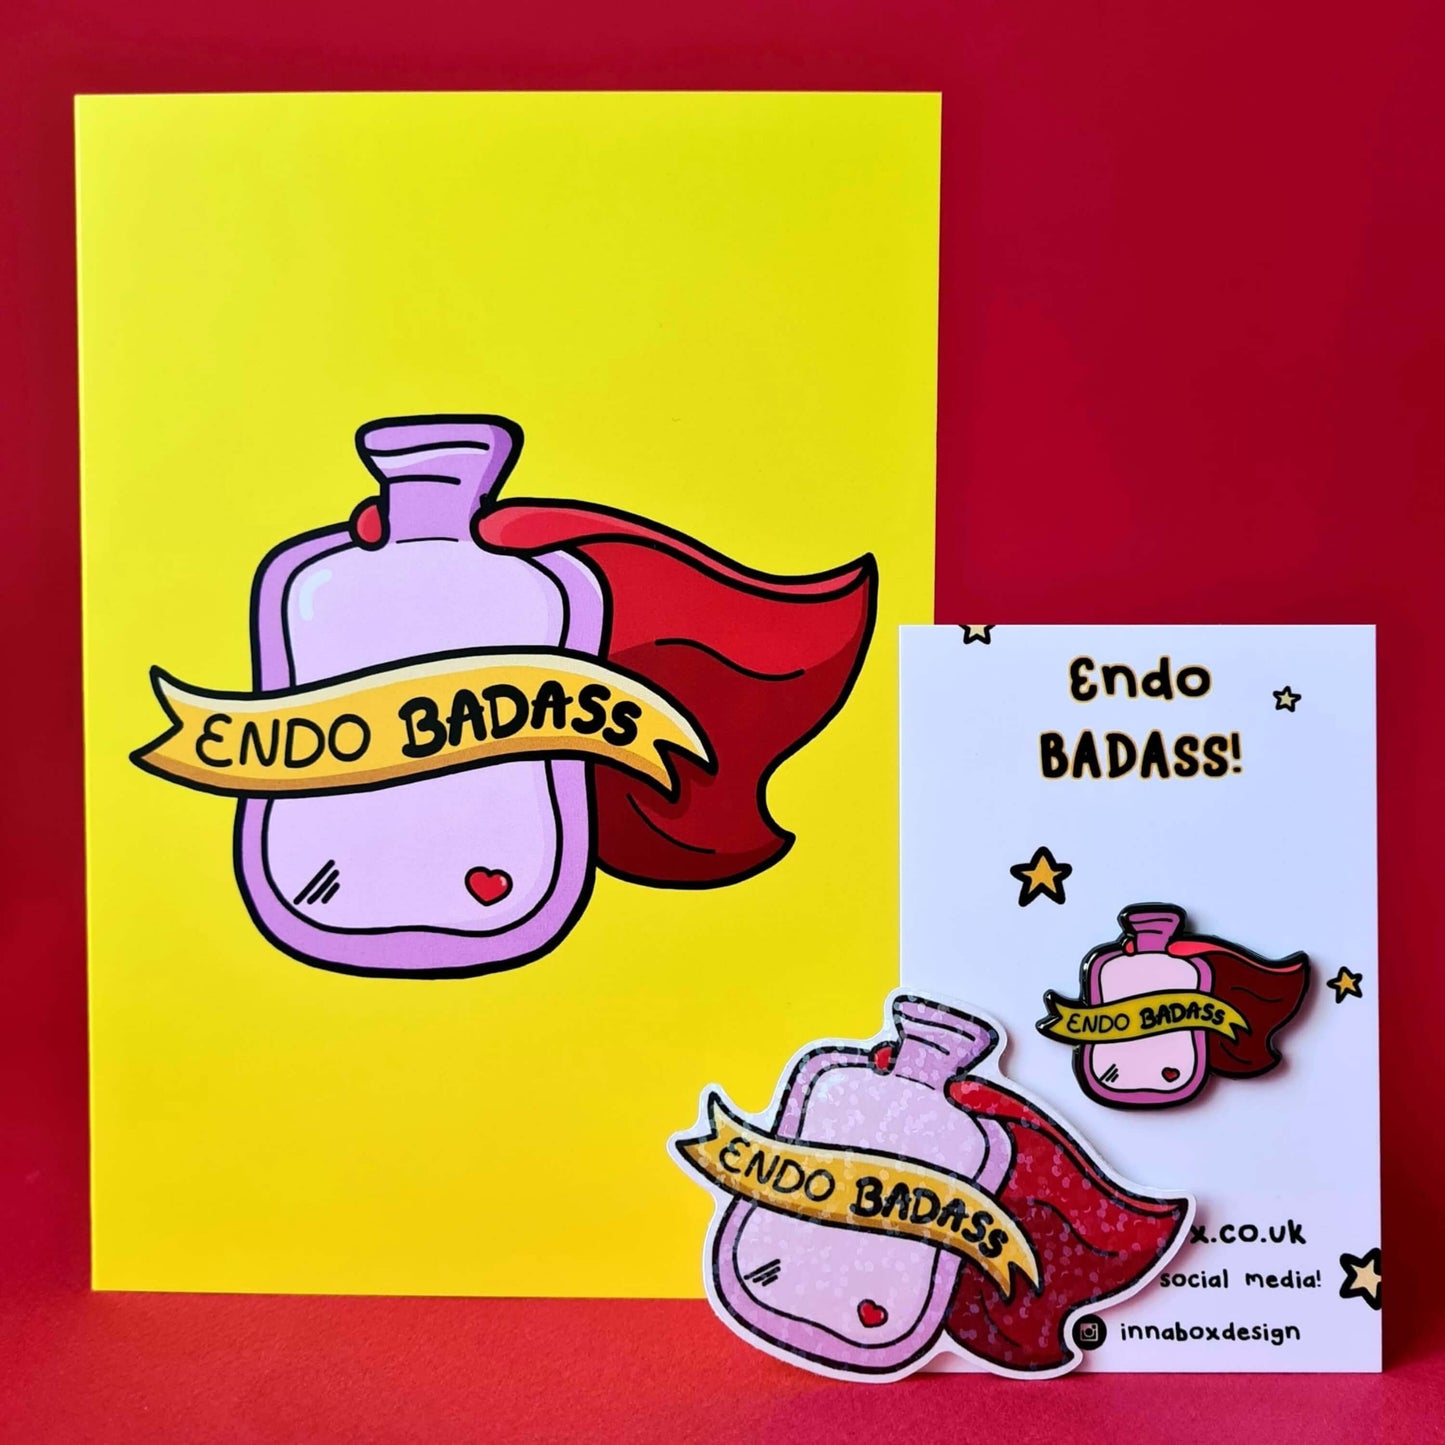 The Endo Badass Card - Endometriosis on a red background with other endo themed innabox products, a pin badge and holographic sticker. The yellow based card features a pink hot waterbottle with a small red heart, a red cape and a yellow banner across reading 'endo badass'. Hand drawn design is raising awareness for Endometriosis and pelvic pain.